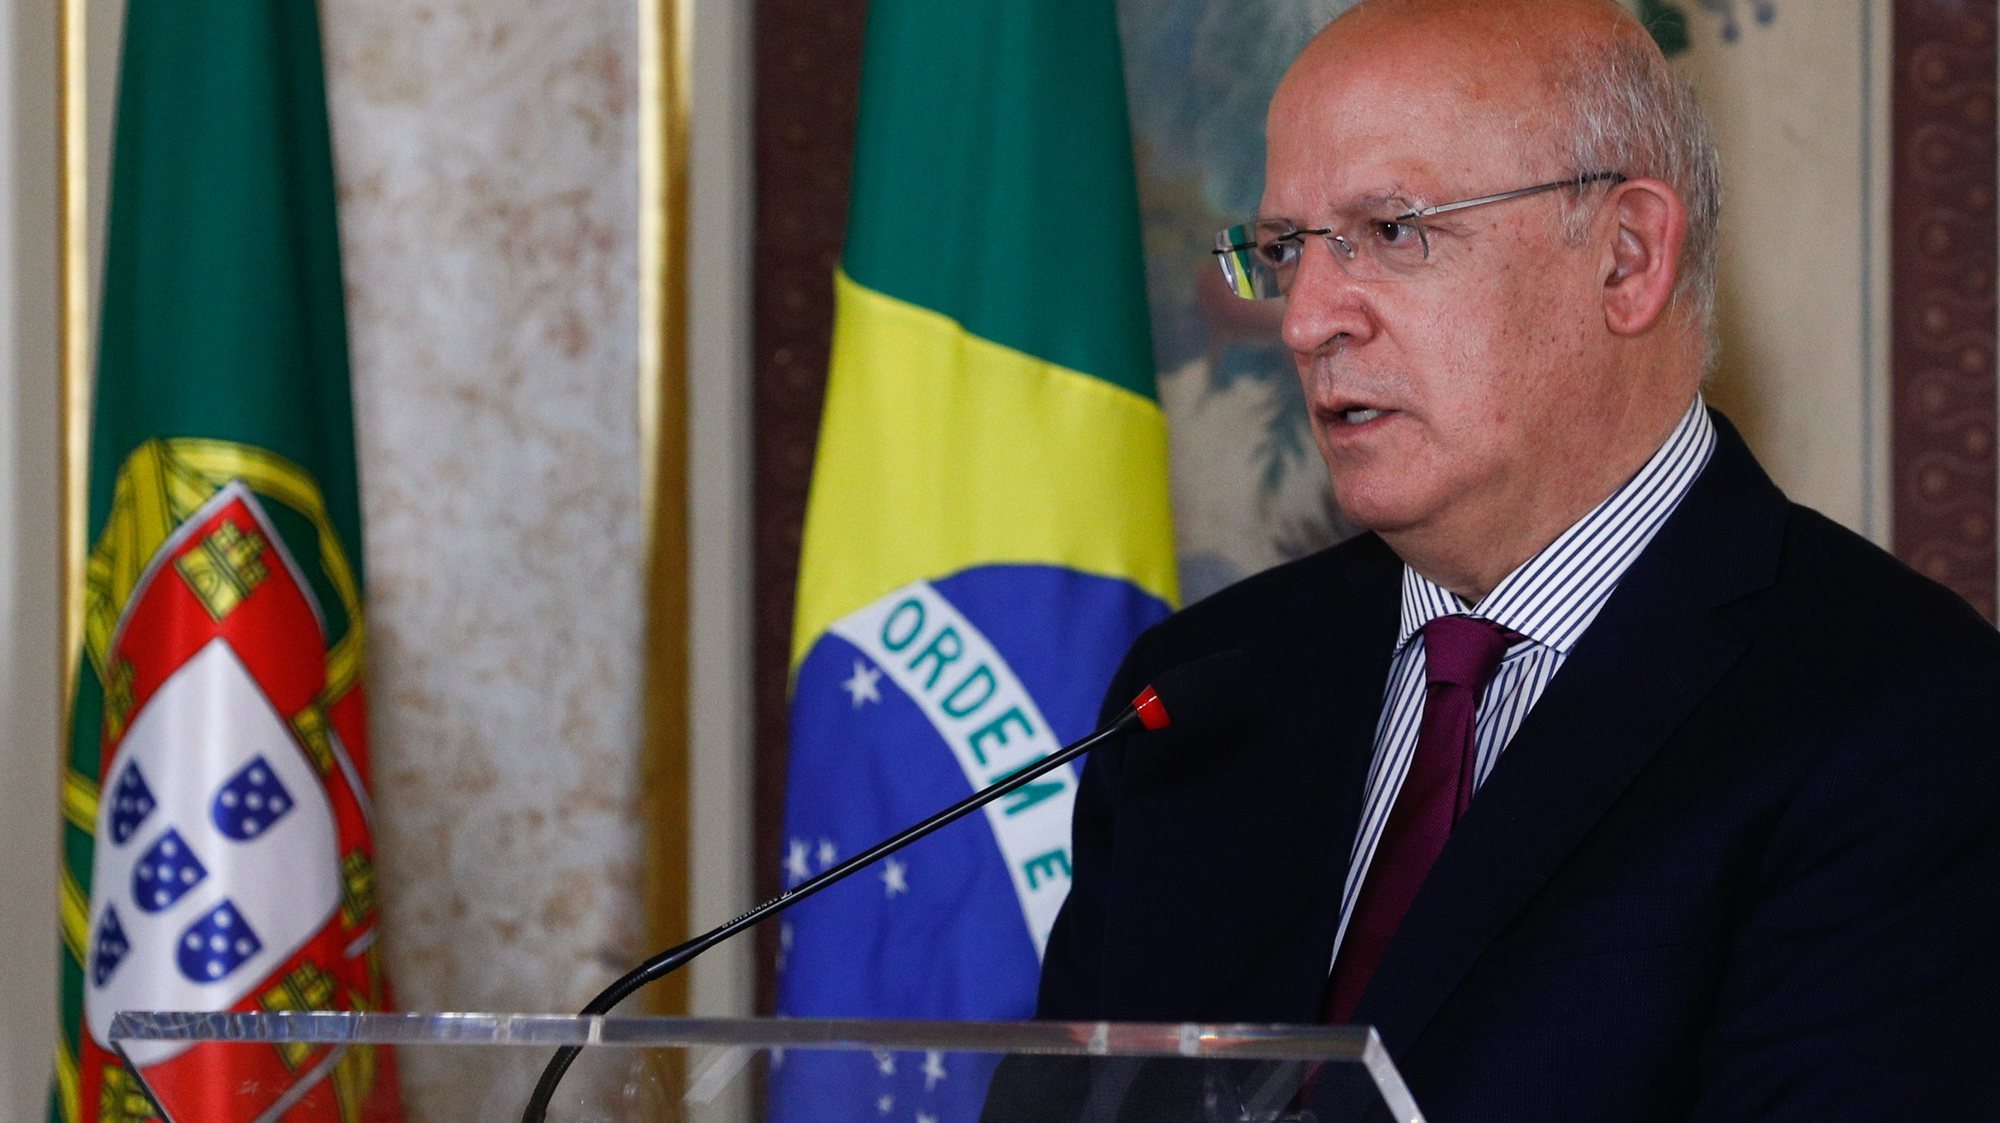 Portuguese Minister of State for Foreigner Affairs Augusto Santos Silva attends a press conference after a meeting with Brazilian Minister of Foreigner Affairs Carlos Franco Franca (not seen) at the Necessidades Palace in Lisbon, Portugal, 02 July 2021.  ANTONIO COTRIM/LUSA